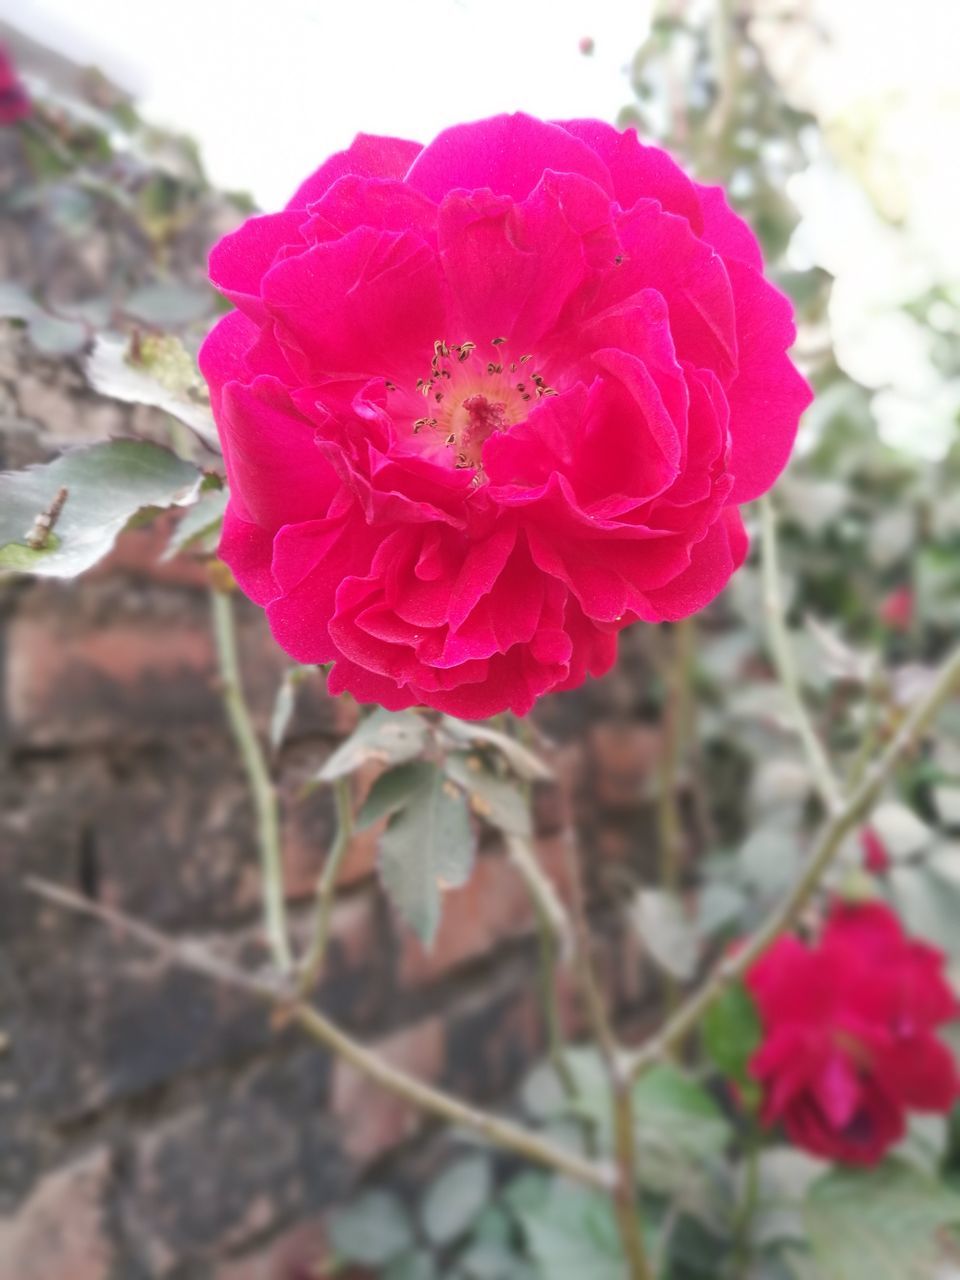 plant, flower, flowering plant, beauty in nature, freshness, petal, close-up, inflorescence, fragility, flower head, rose, pink, nature, garden roses, growth, focus on foreground, red, no people, day, outdoors, plant part, leaf, rose - flower, springtime, blossom